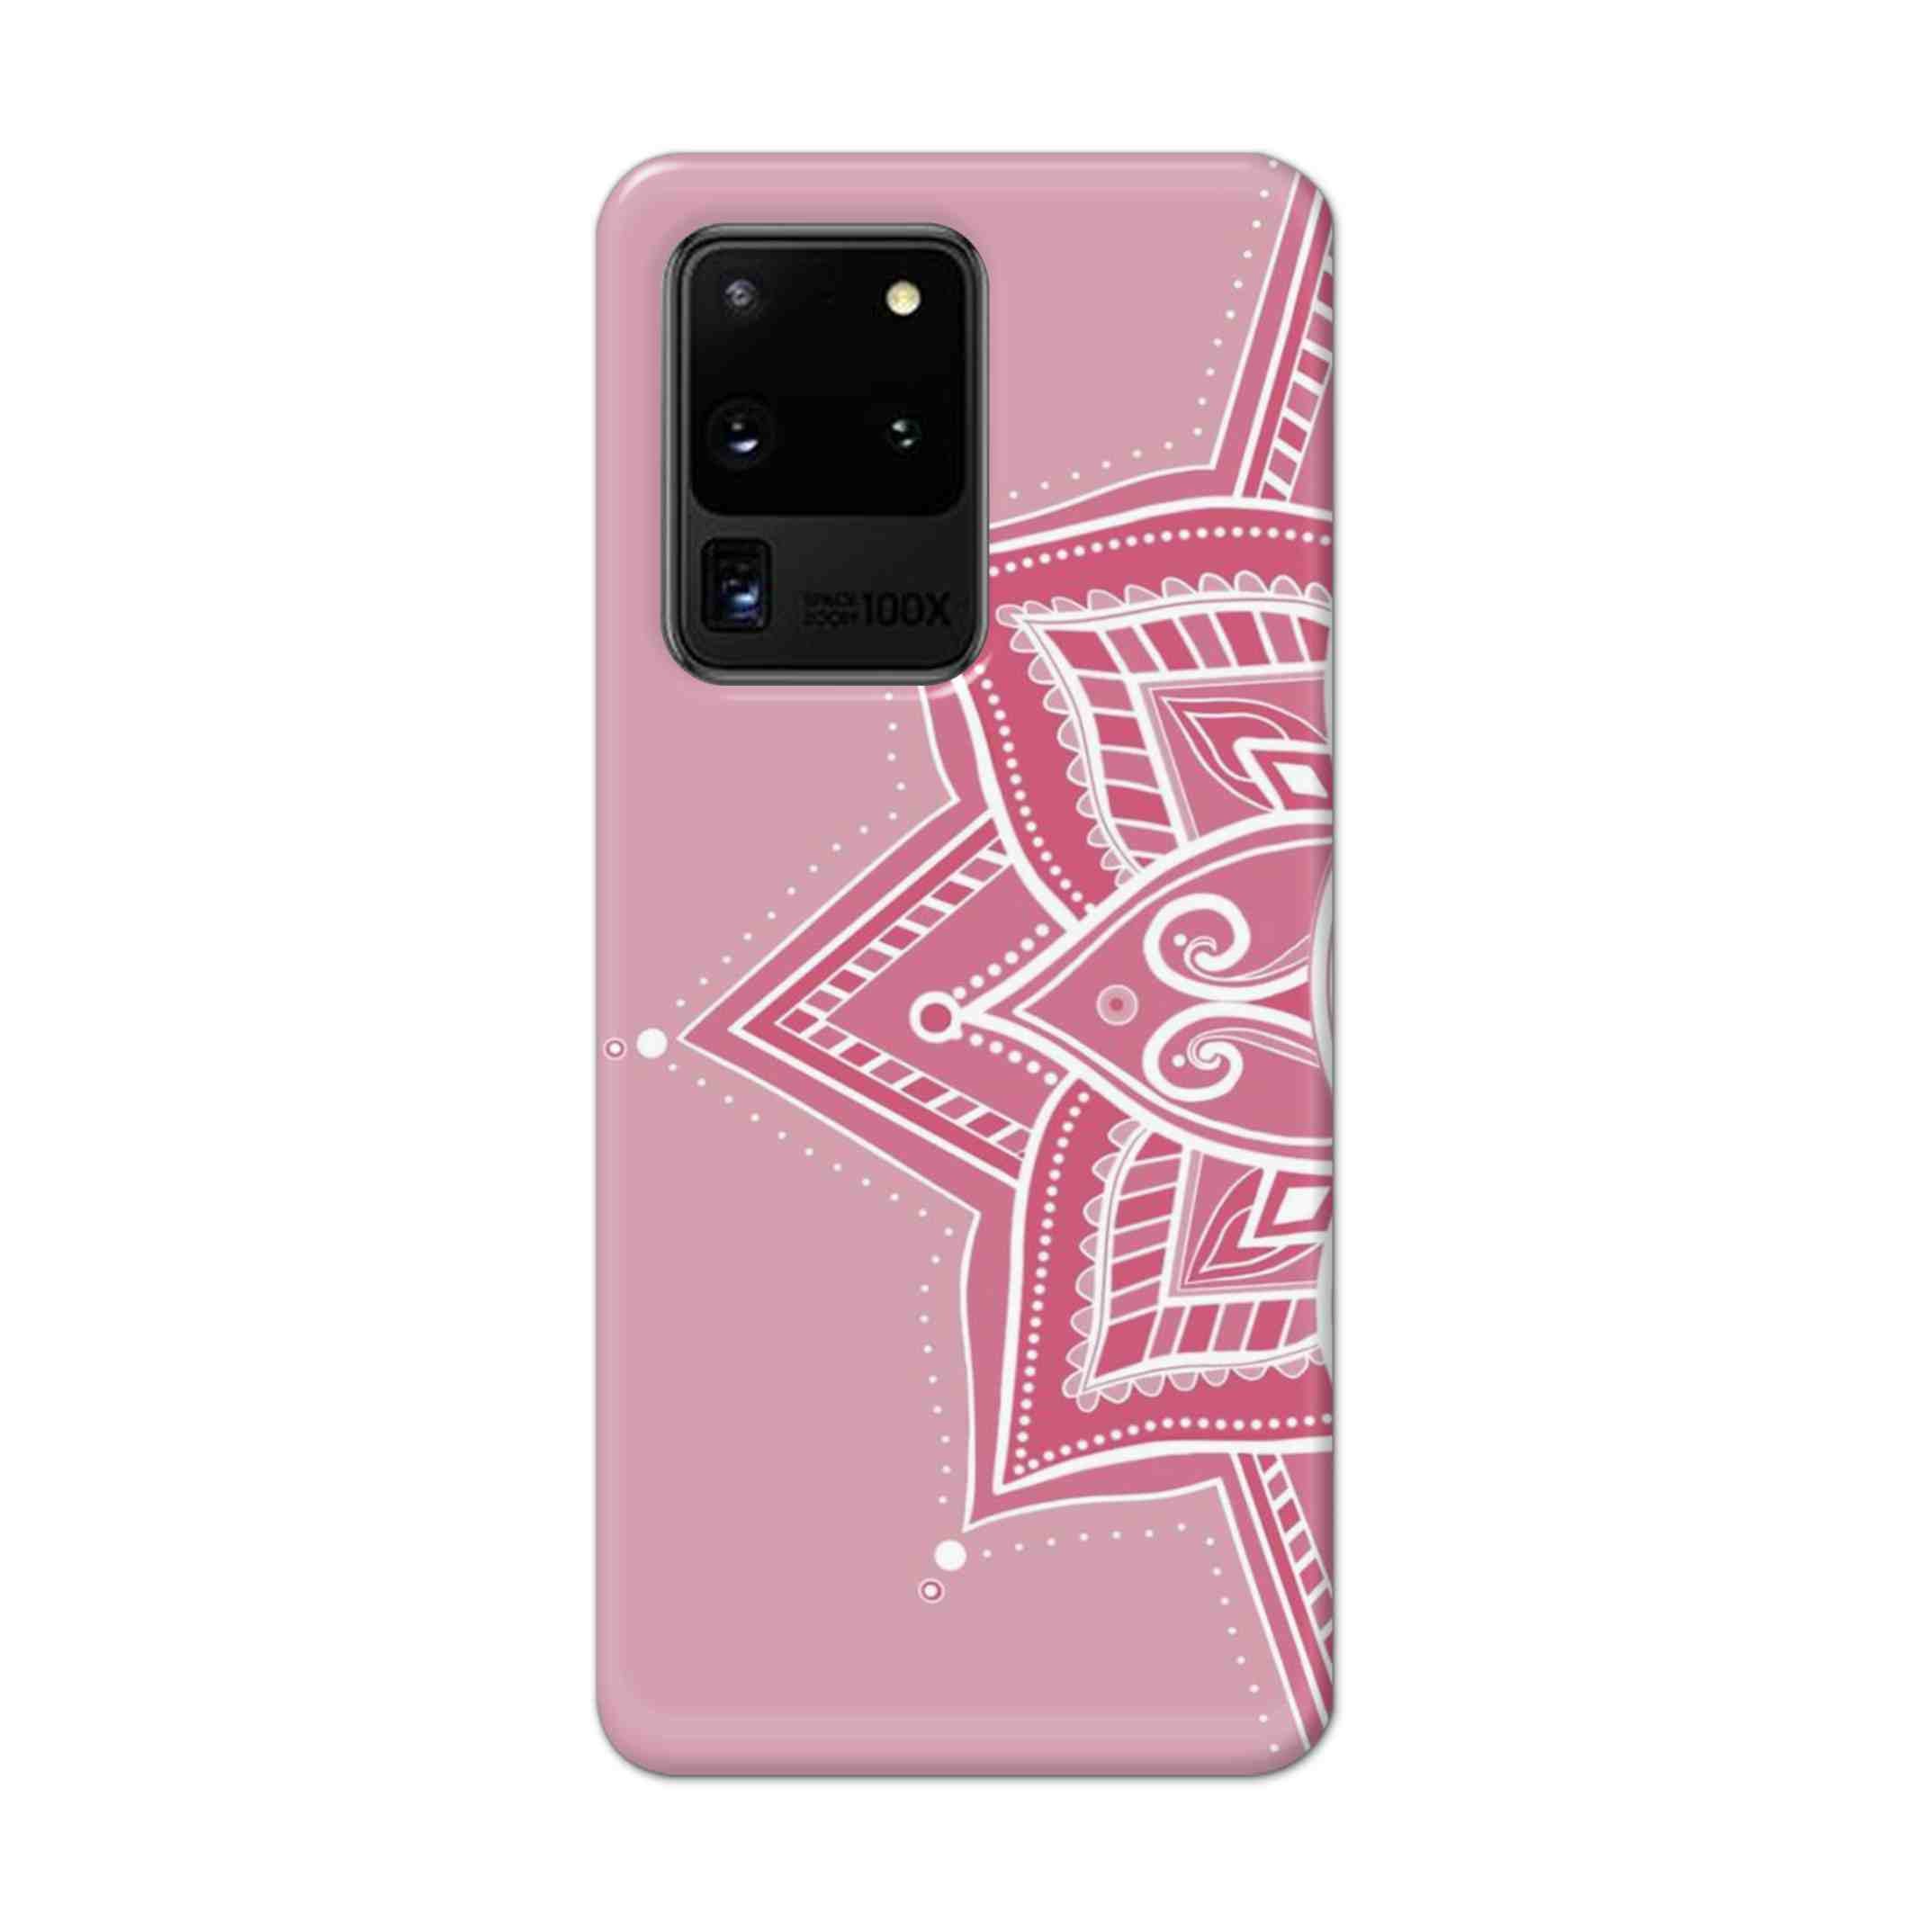 Buy Pink Rangoli Hard Back Mobile Phone Case Cover For Samsung Galaxy S20 Ultra Online